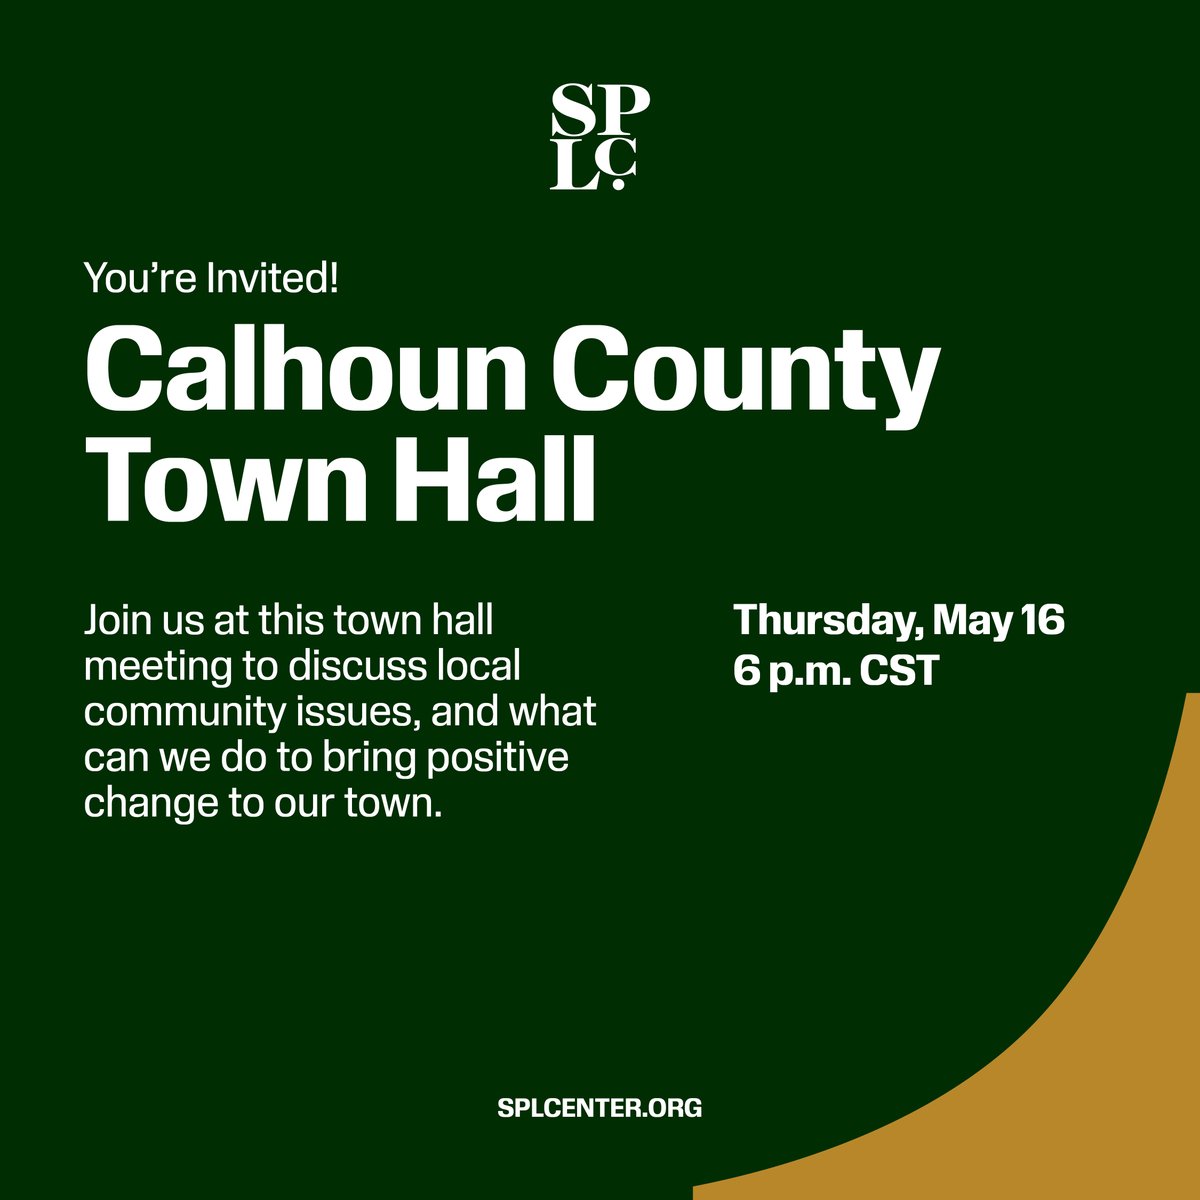 🔔TODAY at 6 p.m.: We want to hear from the Calhoun County, Alabama, community 📢 ! Join the #SPLCAlabama state office at the William Hutchins Building (715 Martin Luther King Dr., Hobson City, Alabama) to discuss local issues and how we can bring positive change to the town.